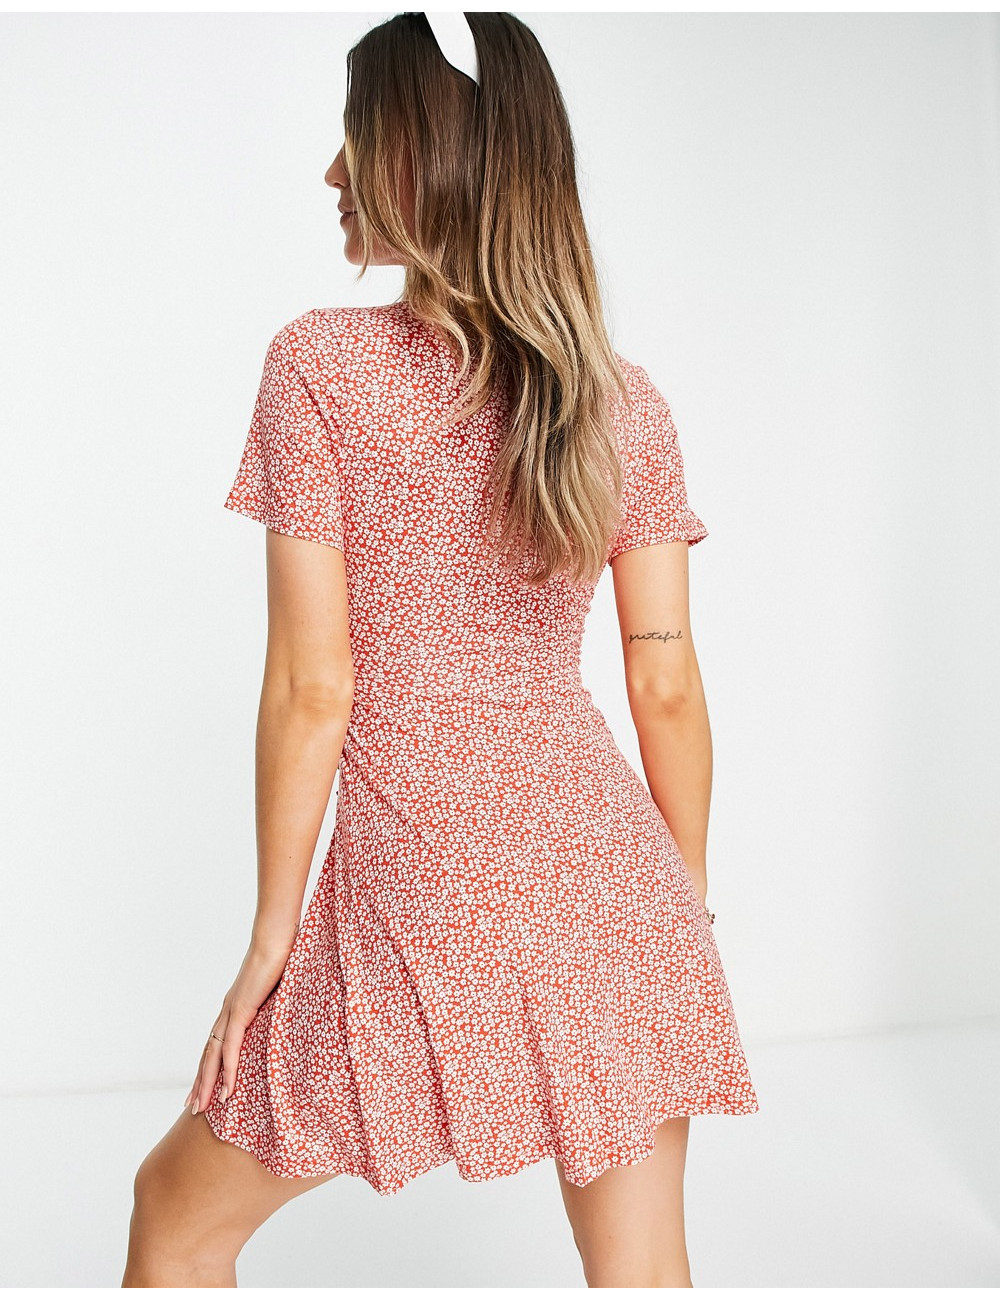 Pull&Bear floral dress in pink